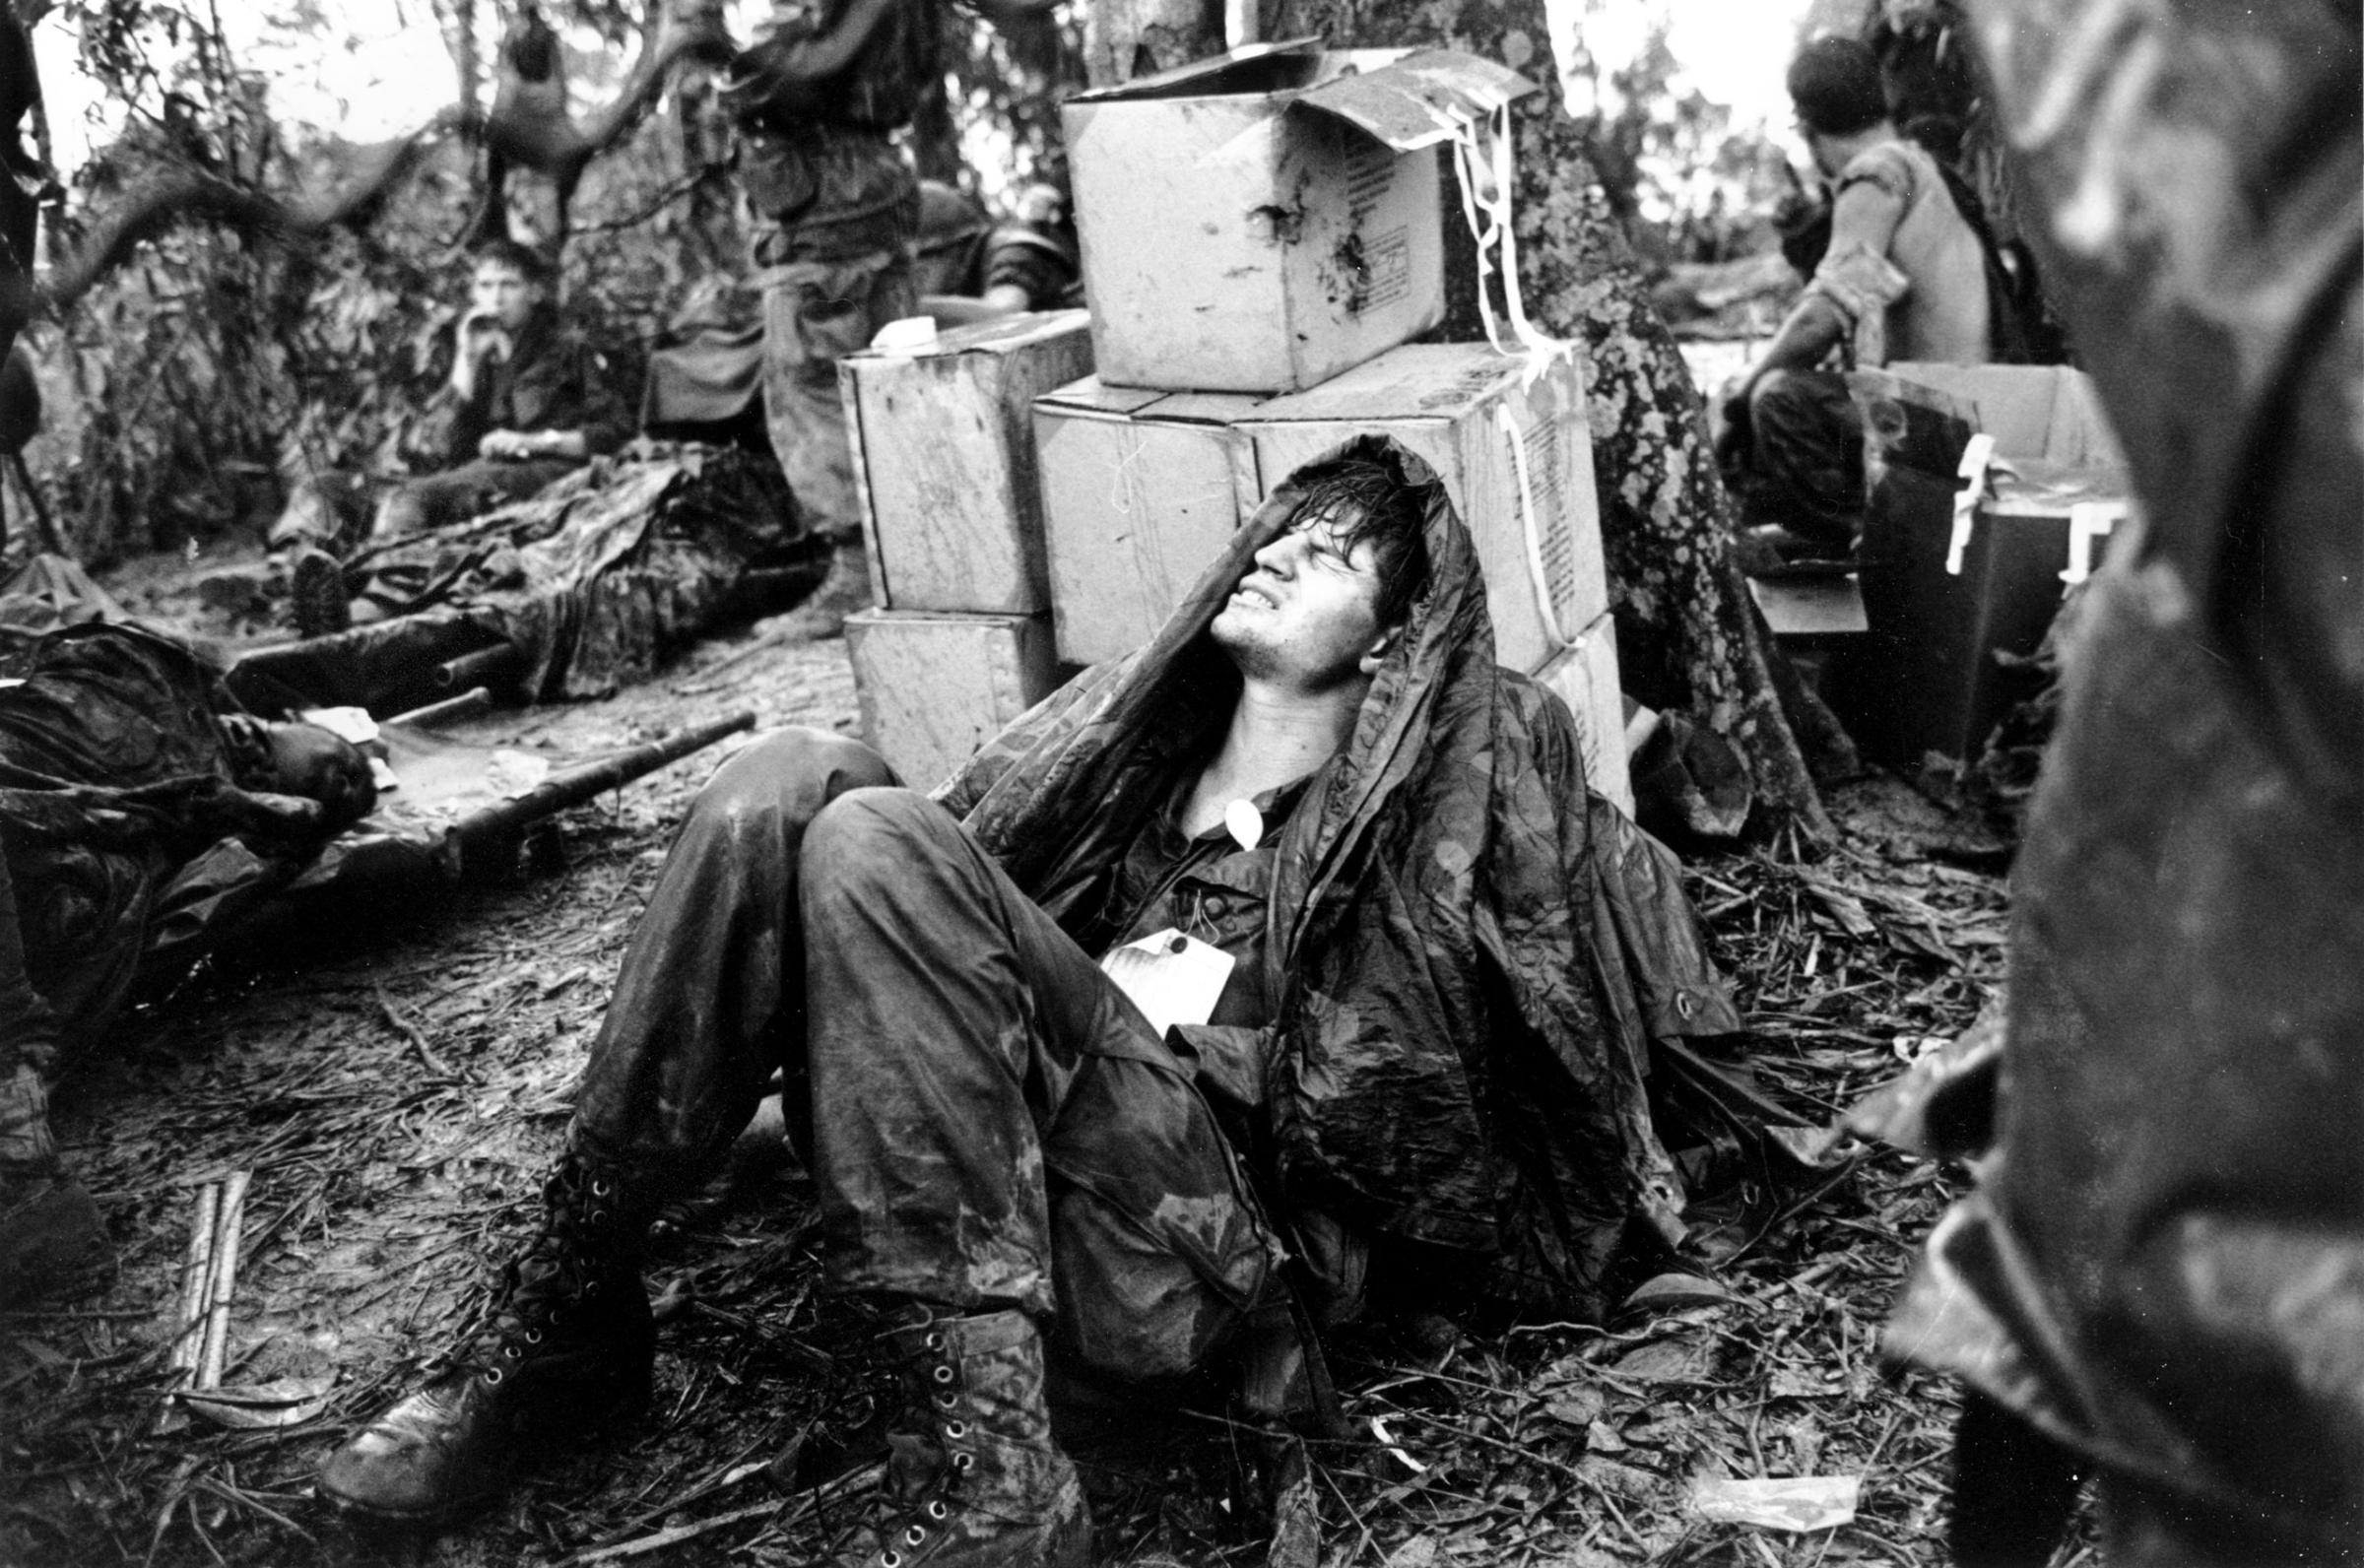 A wounded U.S. paratrooper grimaces in pain as he awaits medical evacuation at base camp in the A Shau Valley near the Laos border in South Vietnam on May 19, 1969.